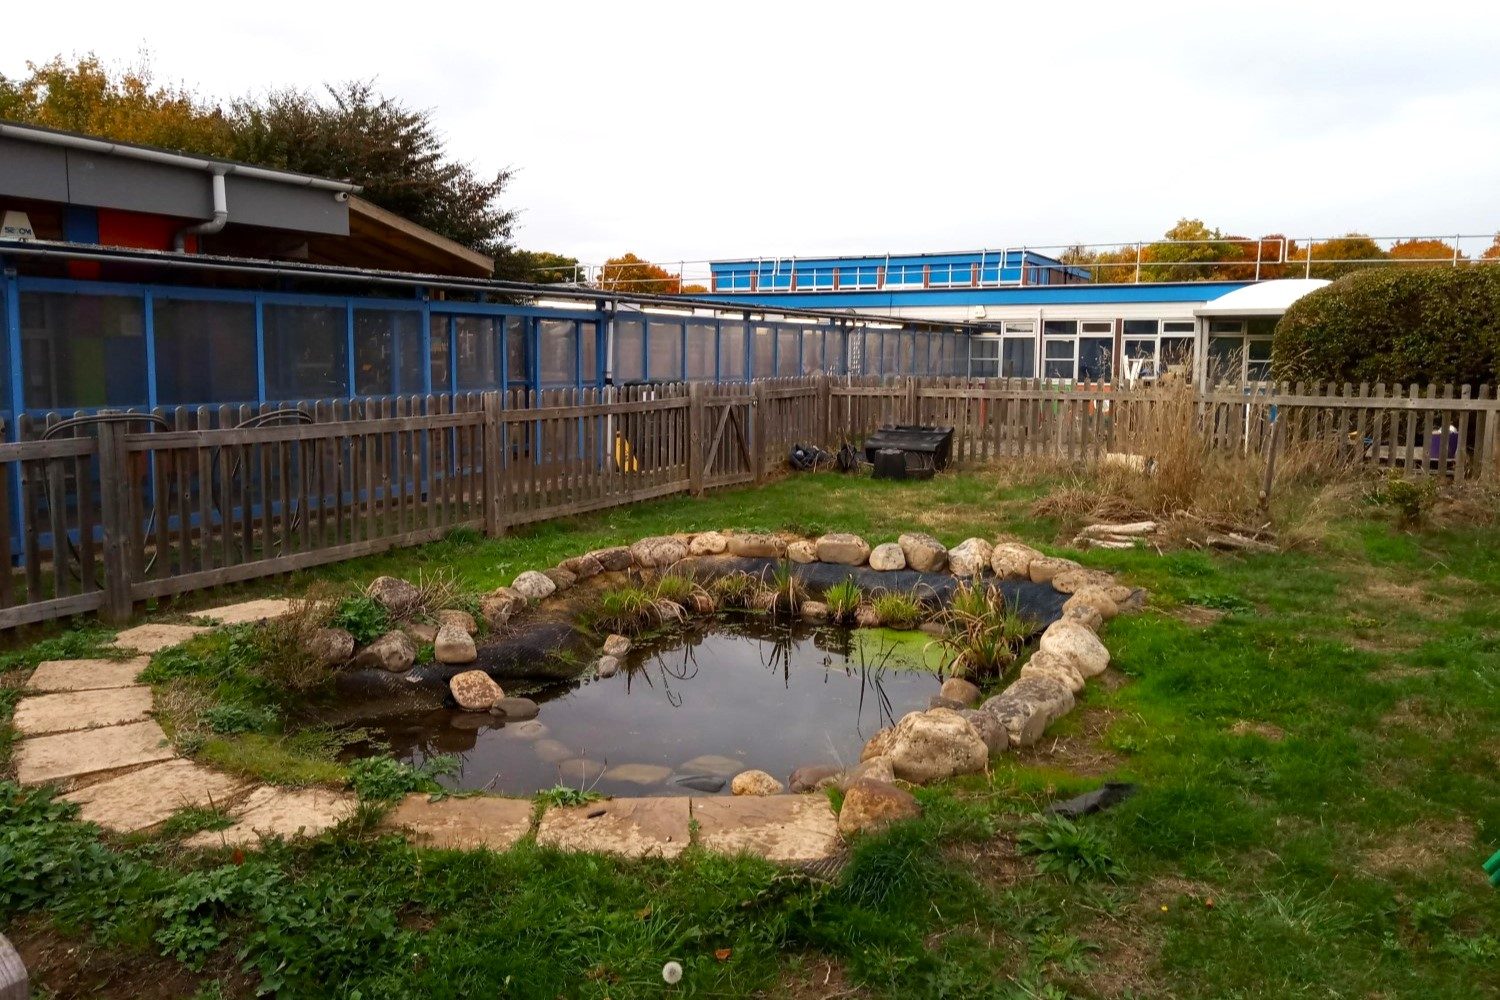 A pond in a fenced area of some climate ready school grounds.